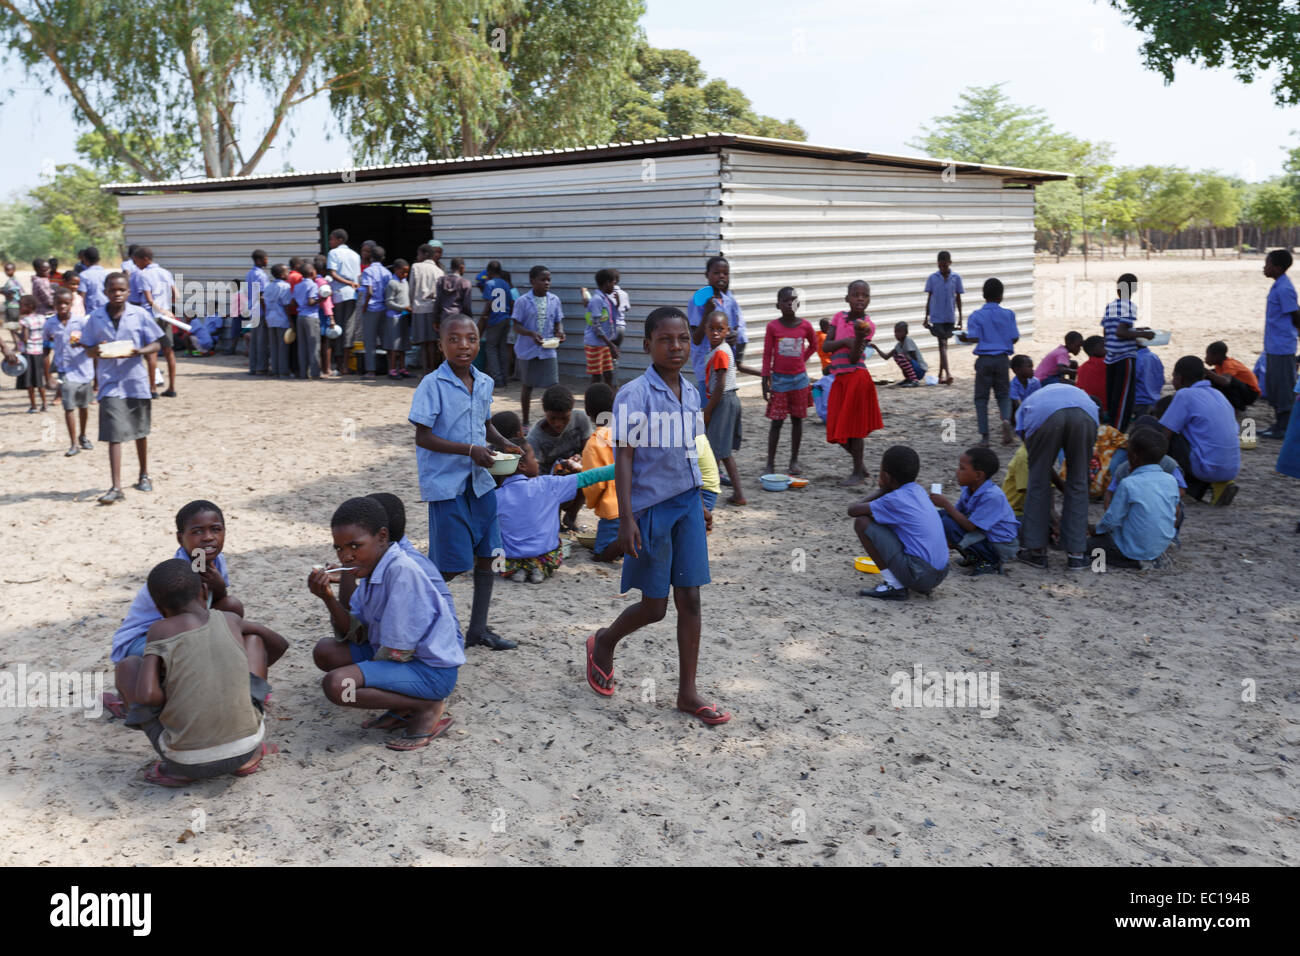 NAMIBIA, KAVANGO, OCTOBER 15: Happy Namibian school children waiting for a lesson. Kavango was the region with the highest pover Stock Photo